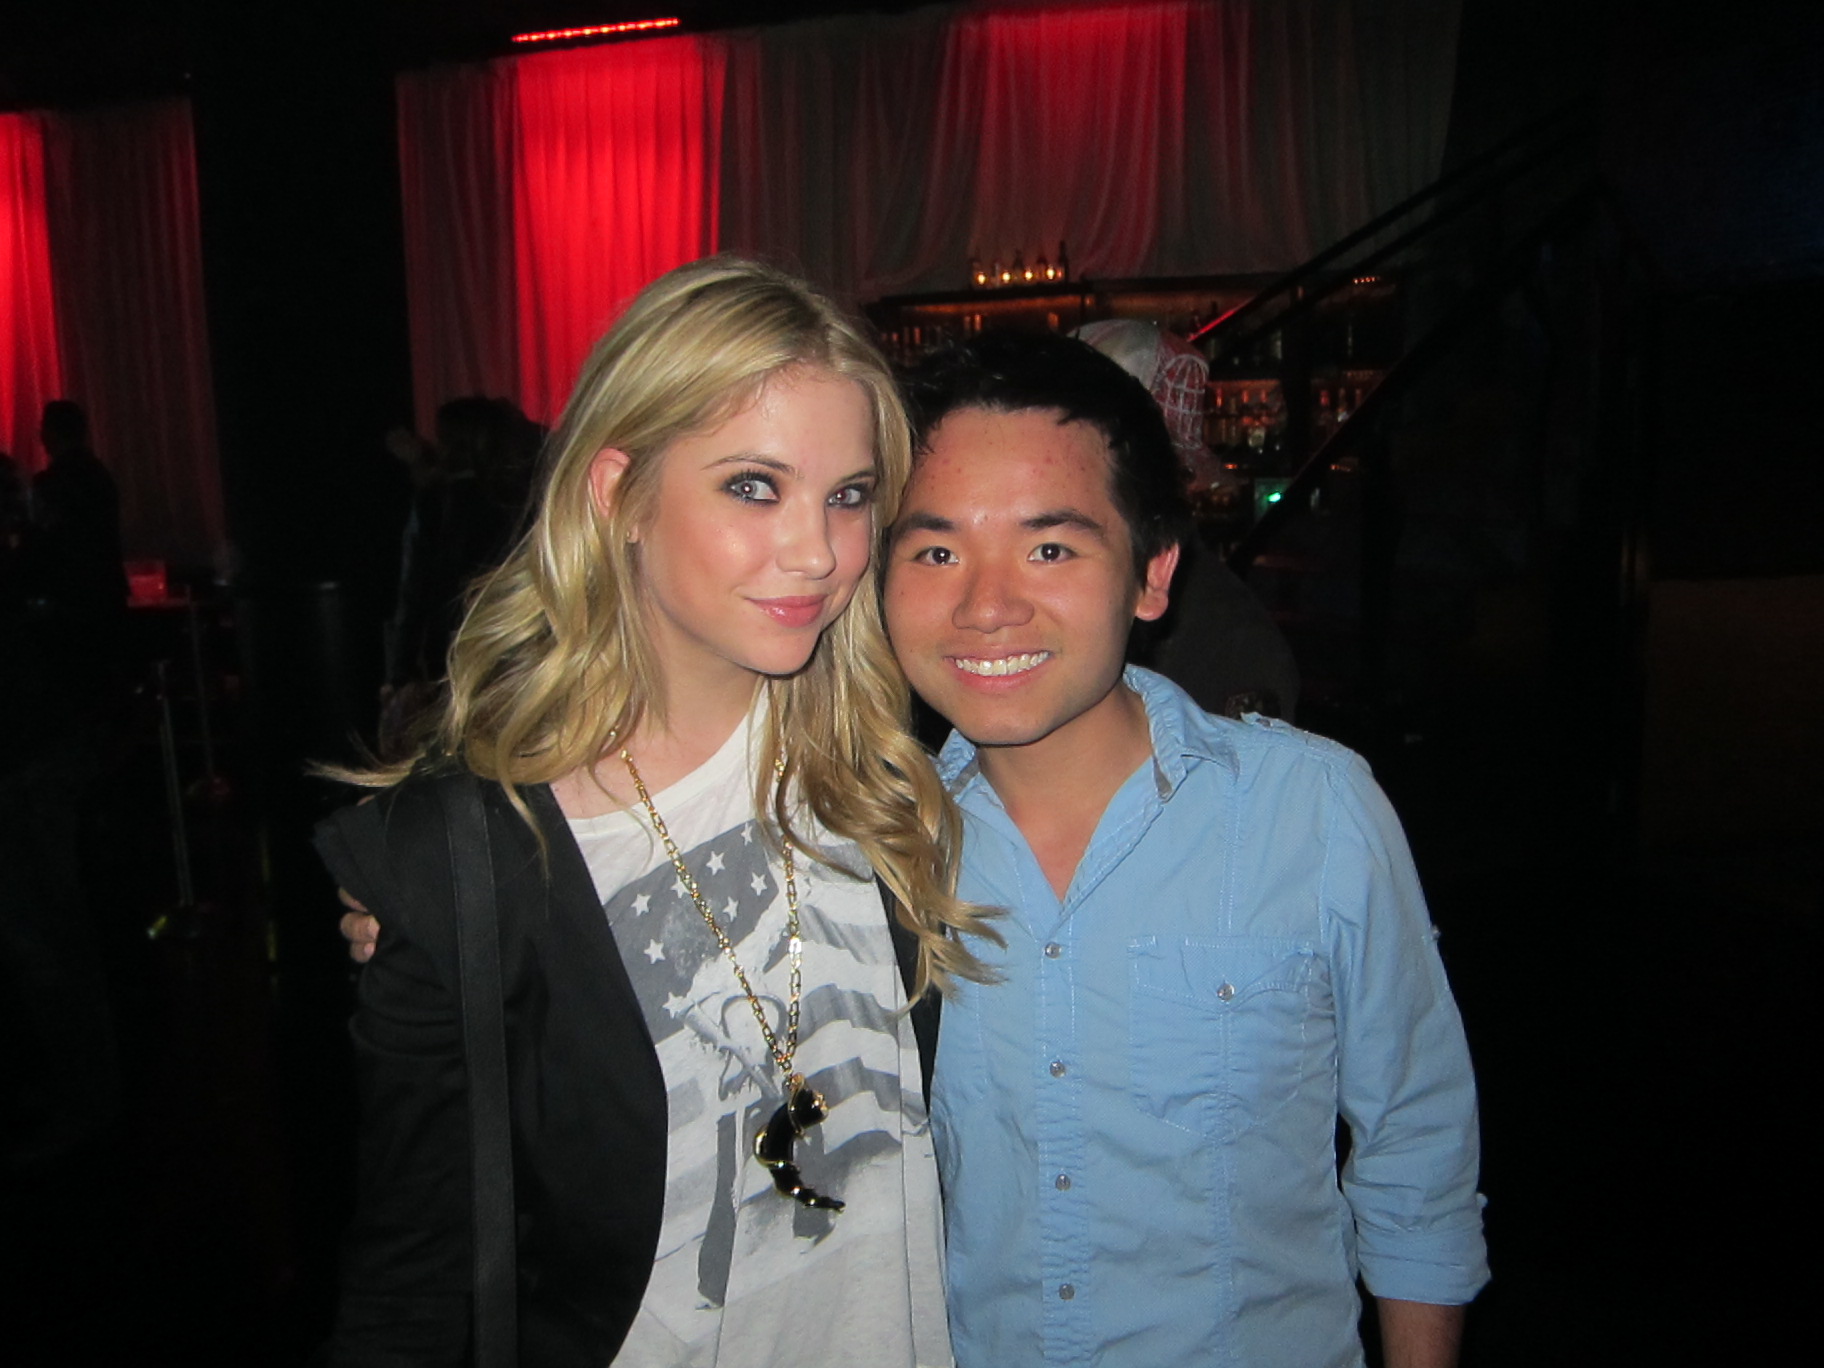 Kevin and Pretty Little Liars' Ashley Benson.